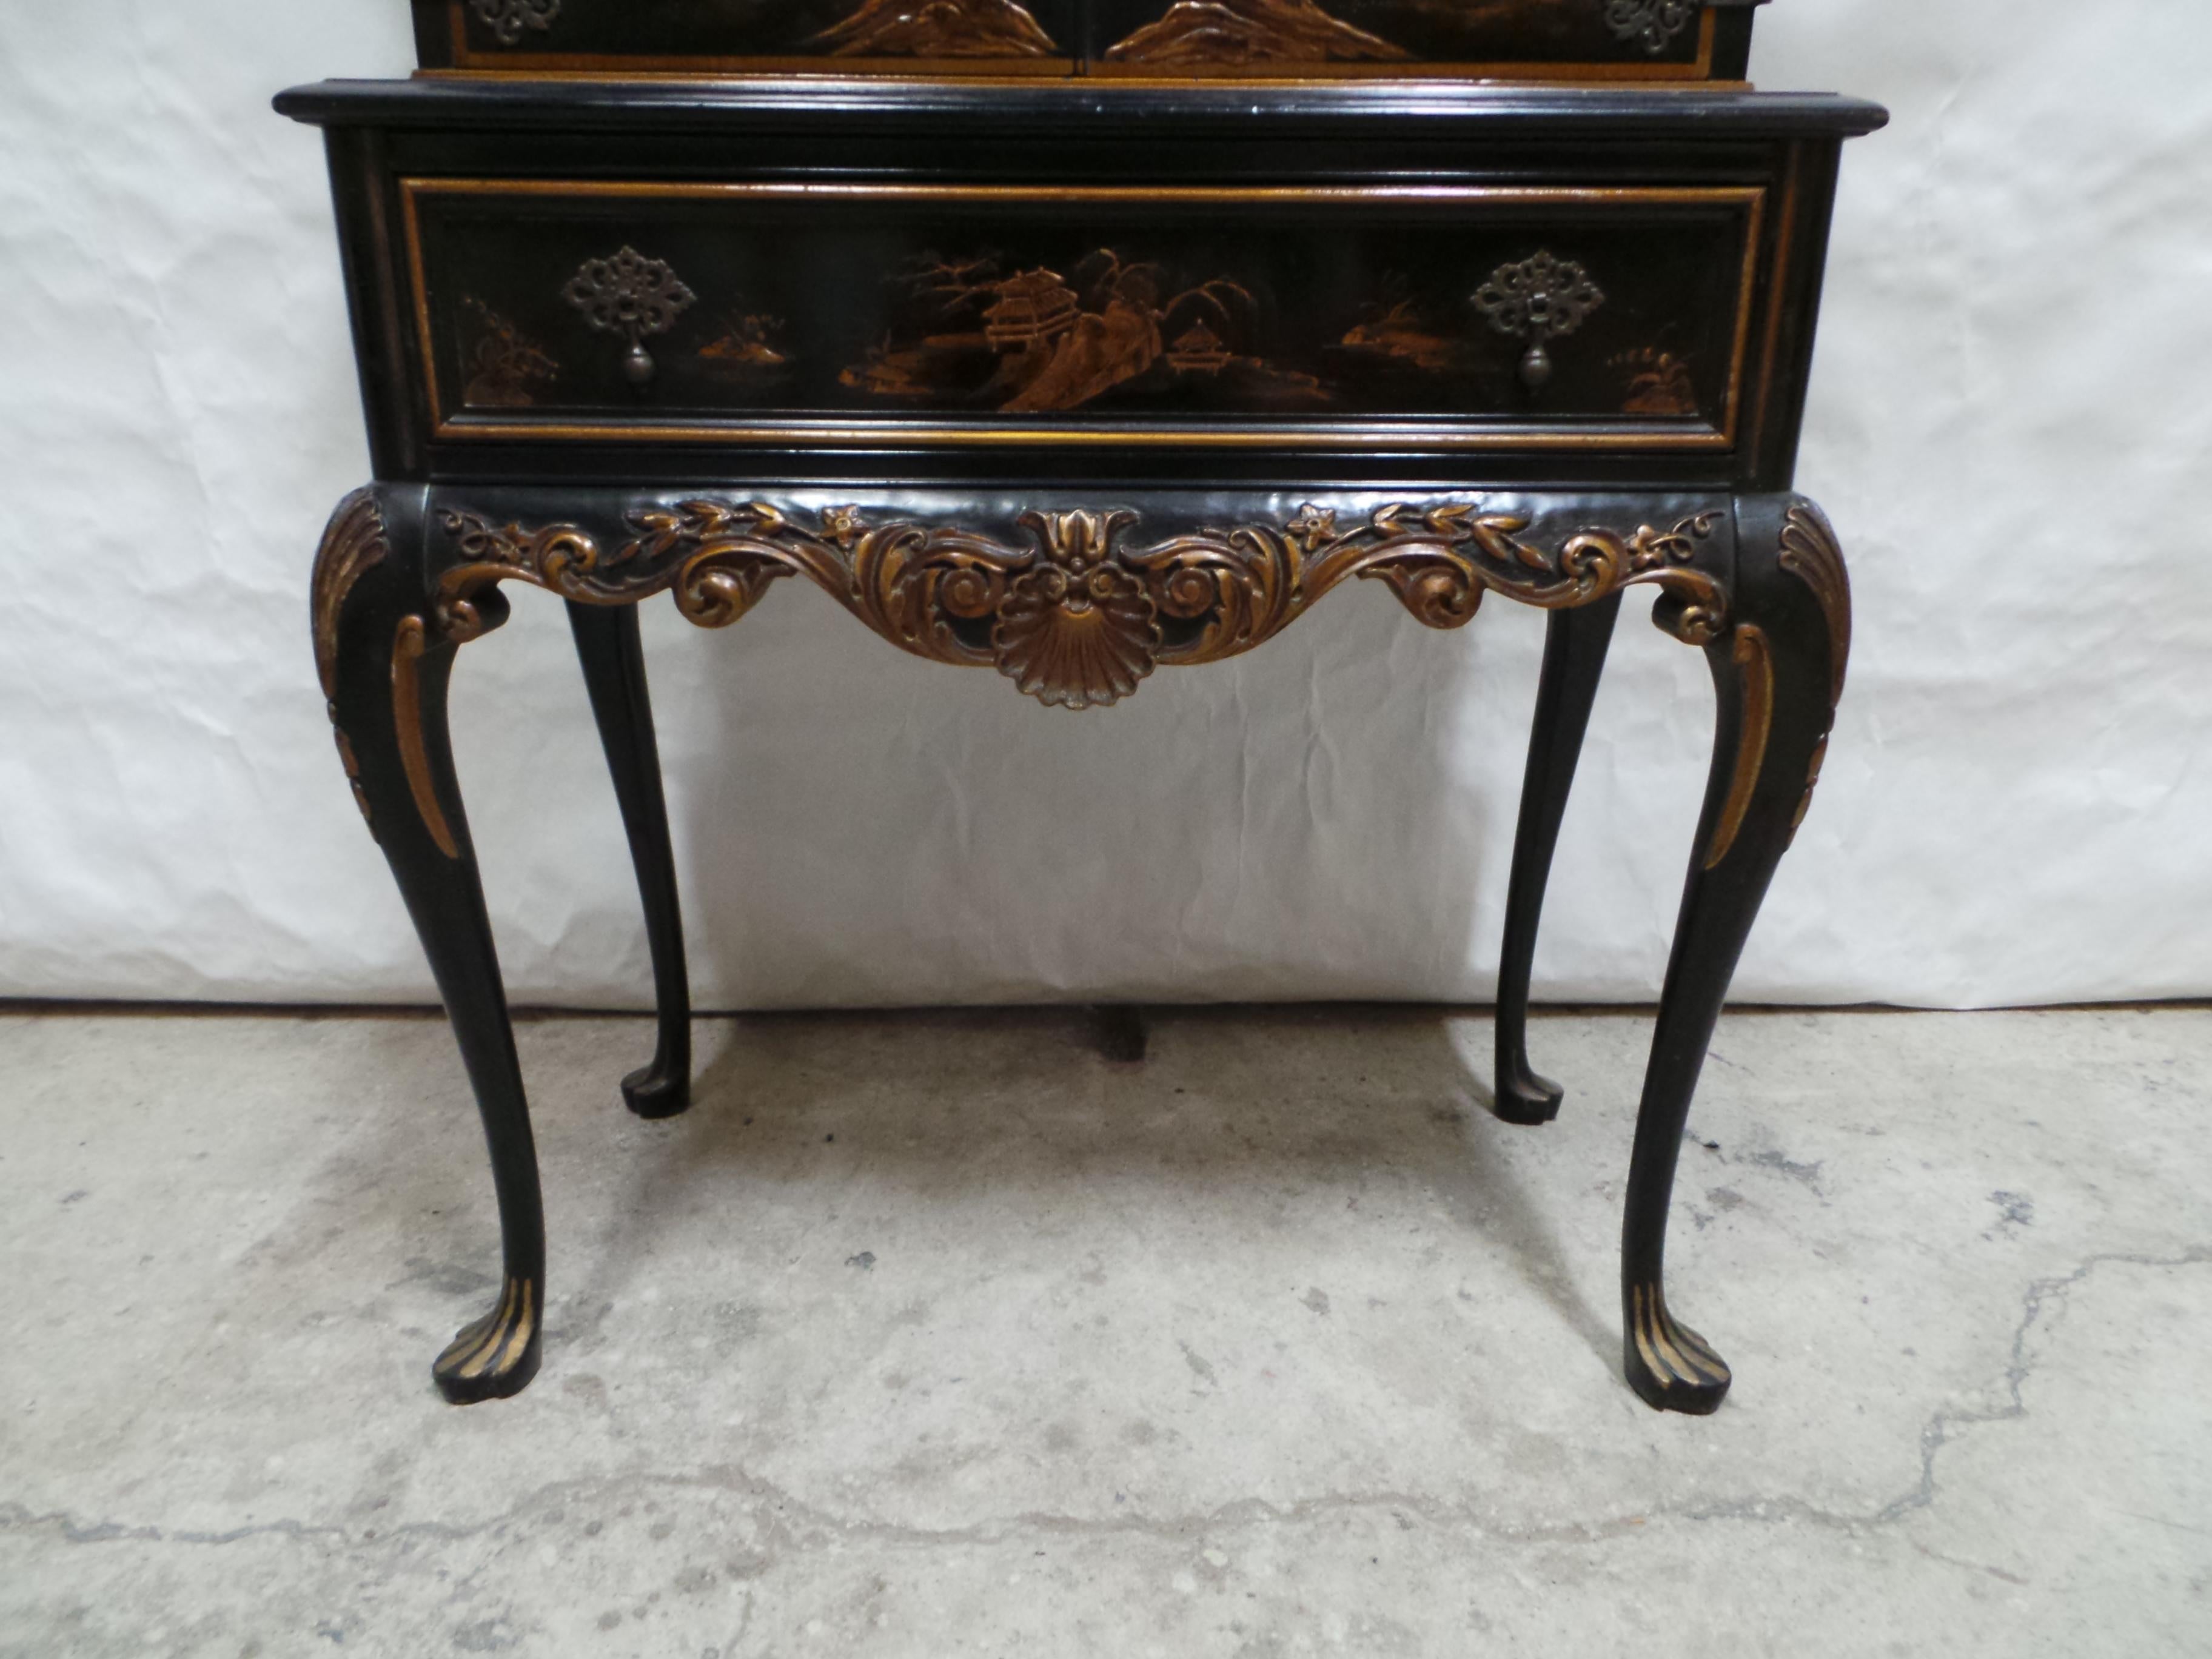 This is a 100% Original finish Beautiful Antique Chinoiseri American Made.